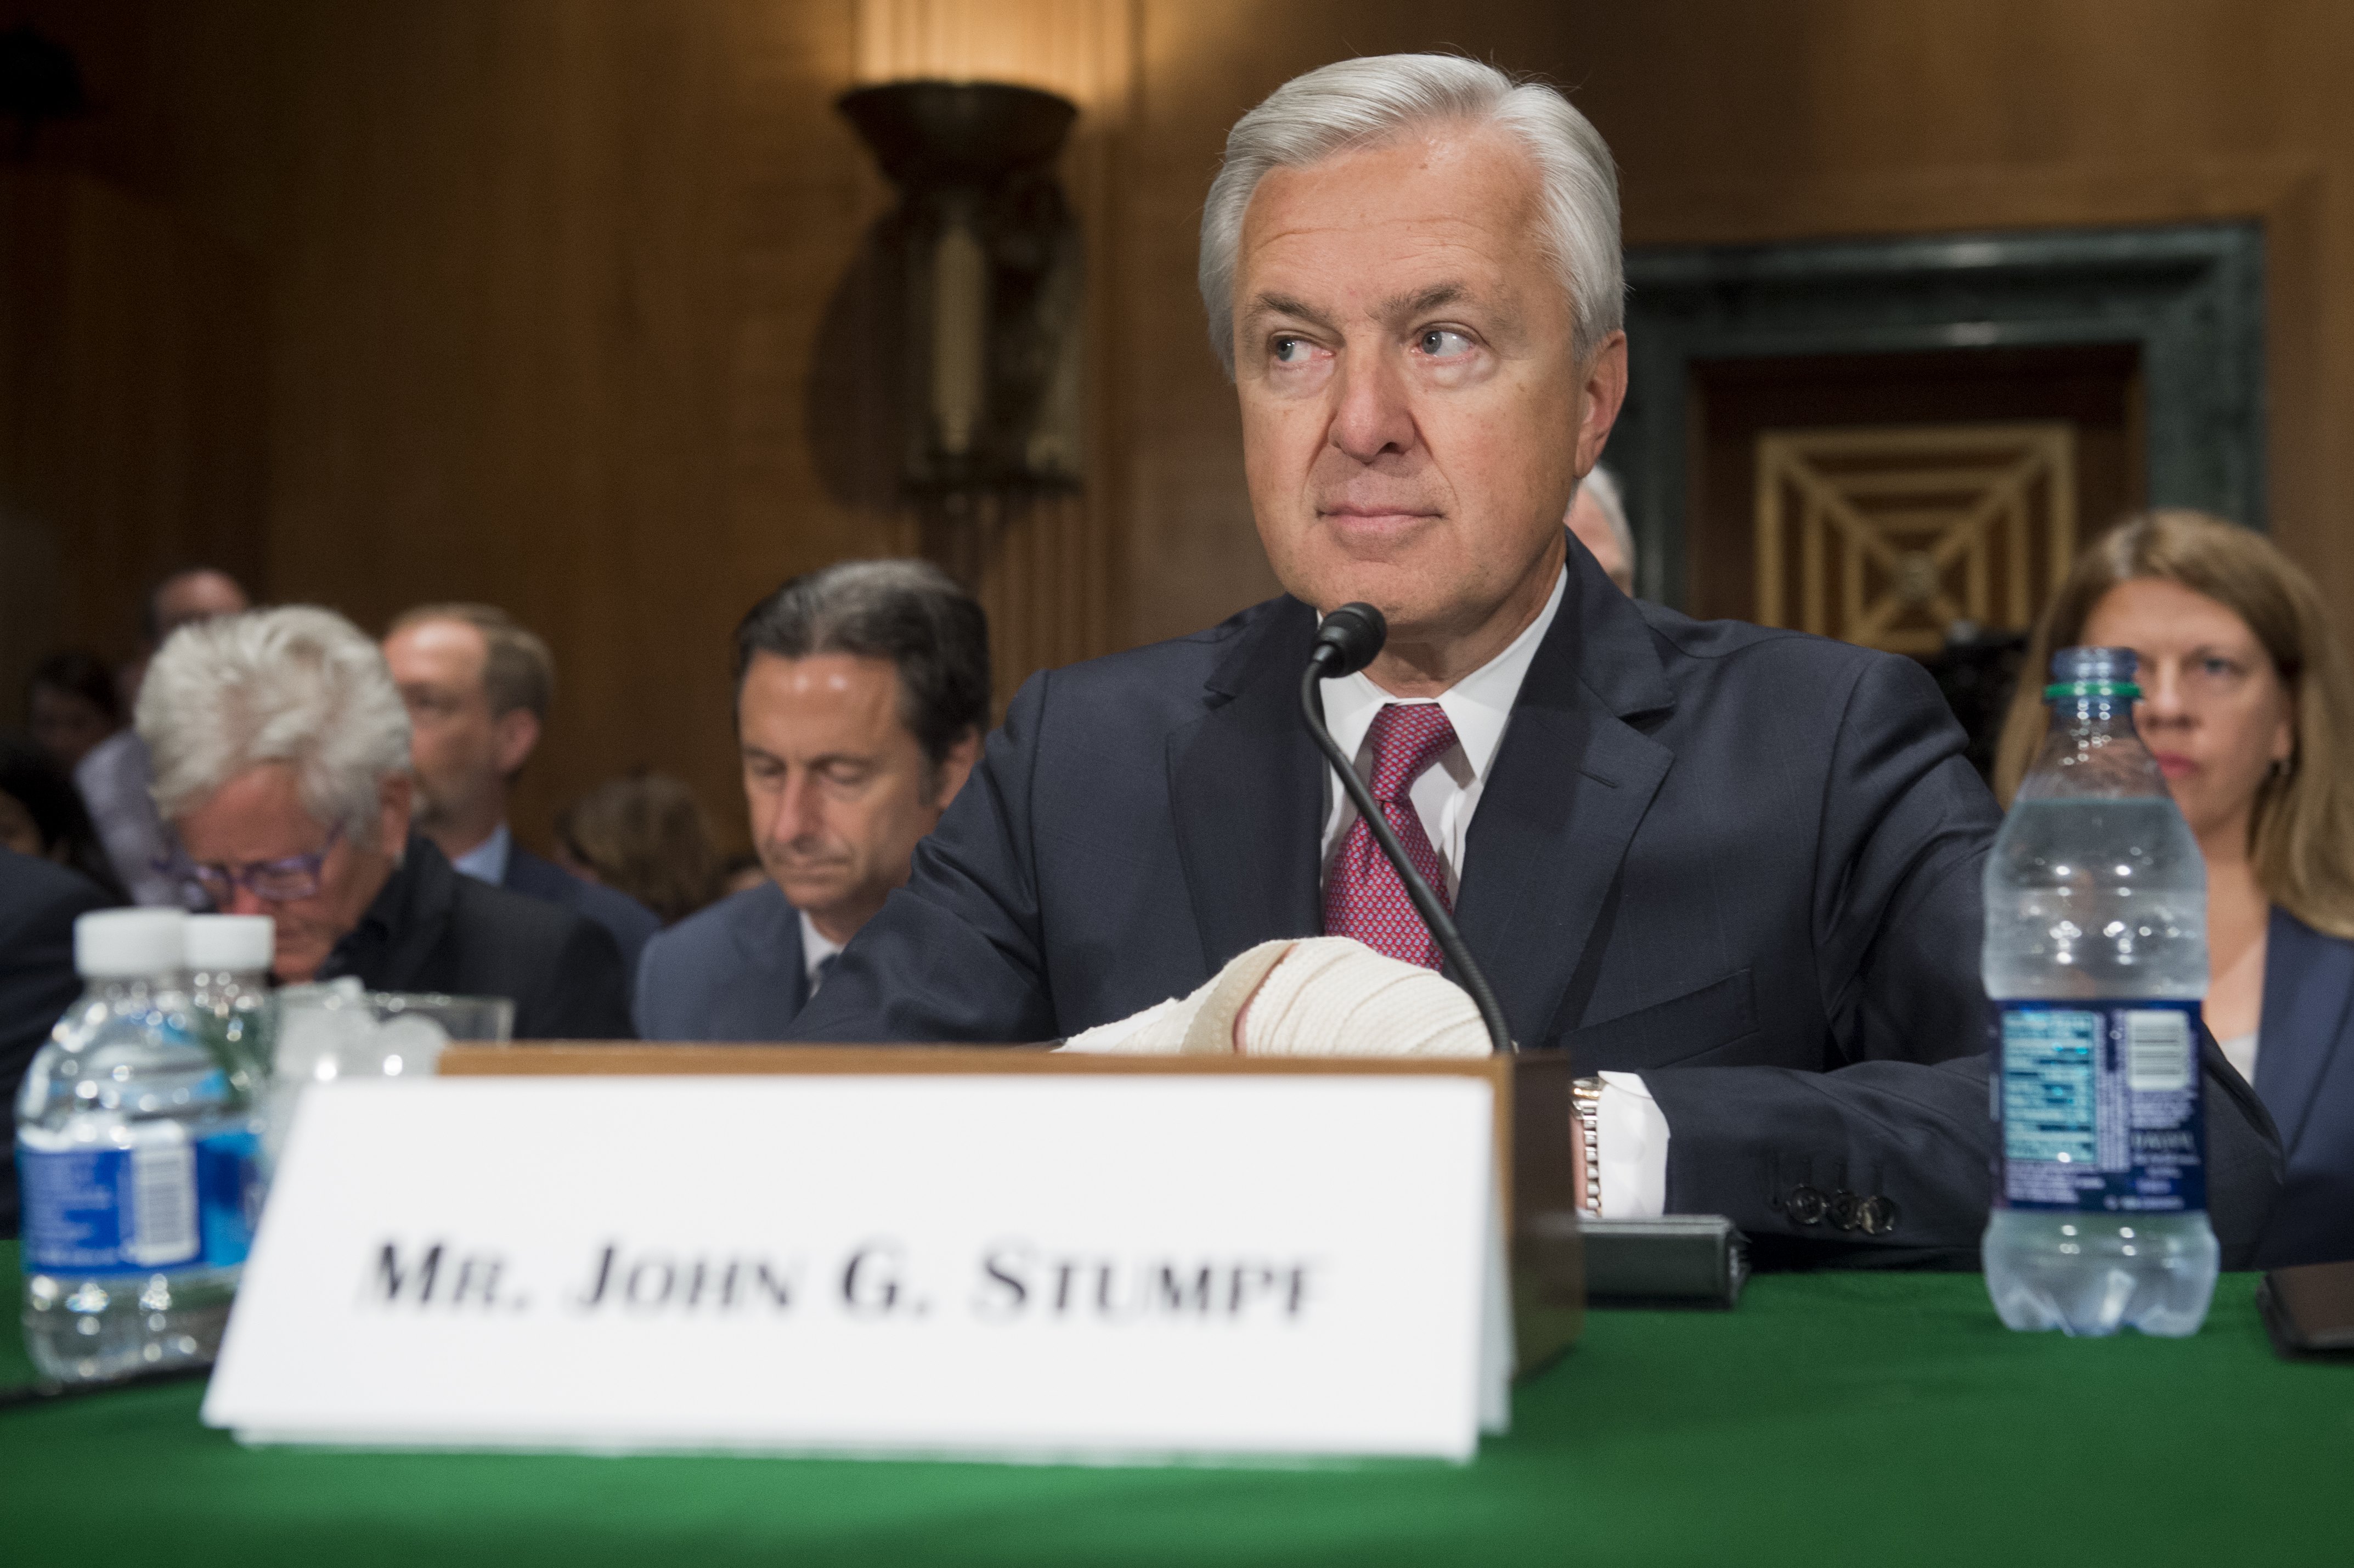 John Stumpf, chairman and CEO of Wells Fargo, arrives to testify about the unauthorized opening of accounts by Wells Fargo during a Senate Banking, Housing and Urban Affairs Committee hearing on Capitol Hill in Washington, DC, September 20, 2016.